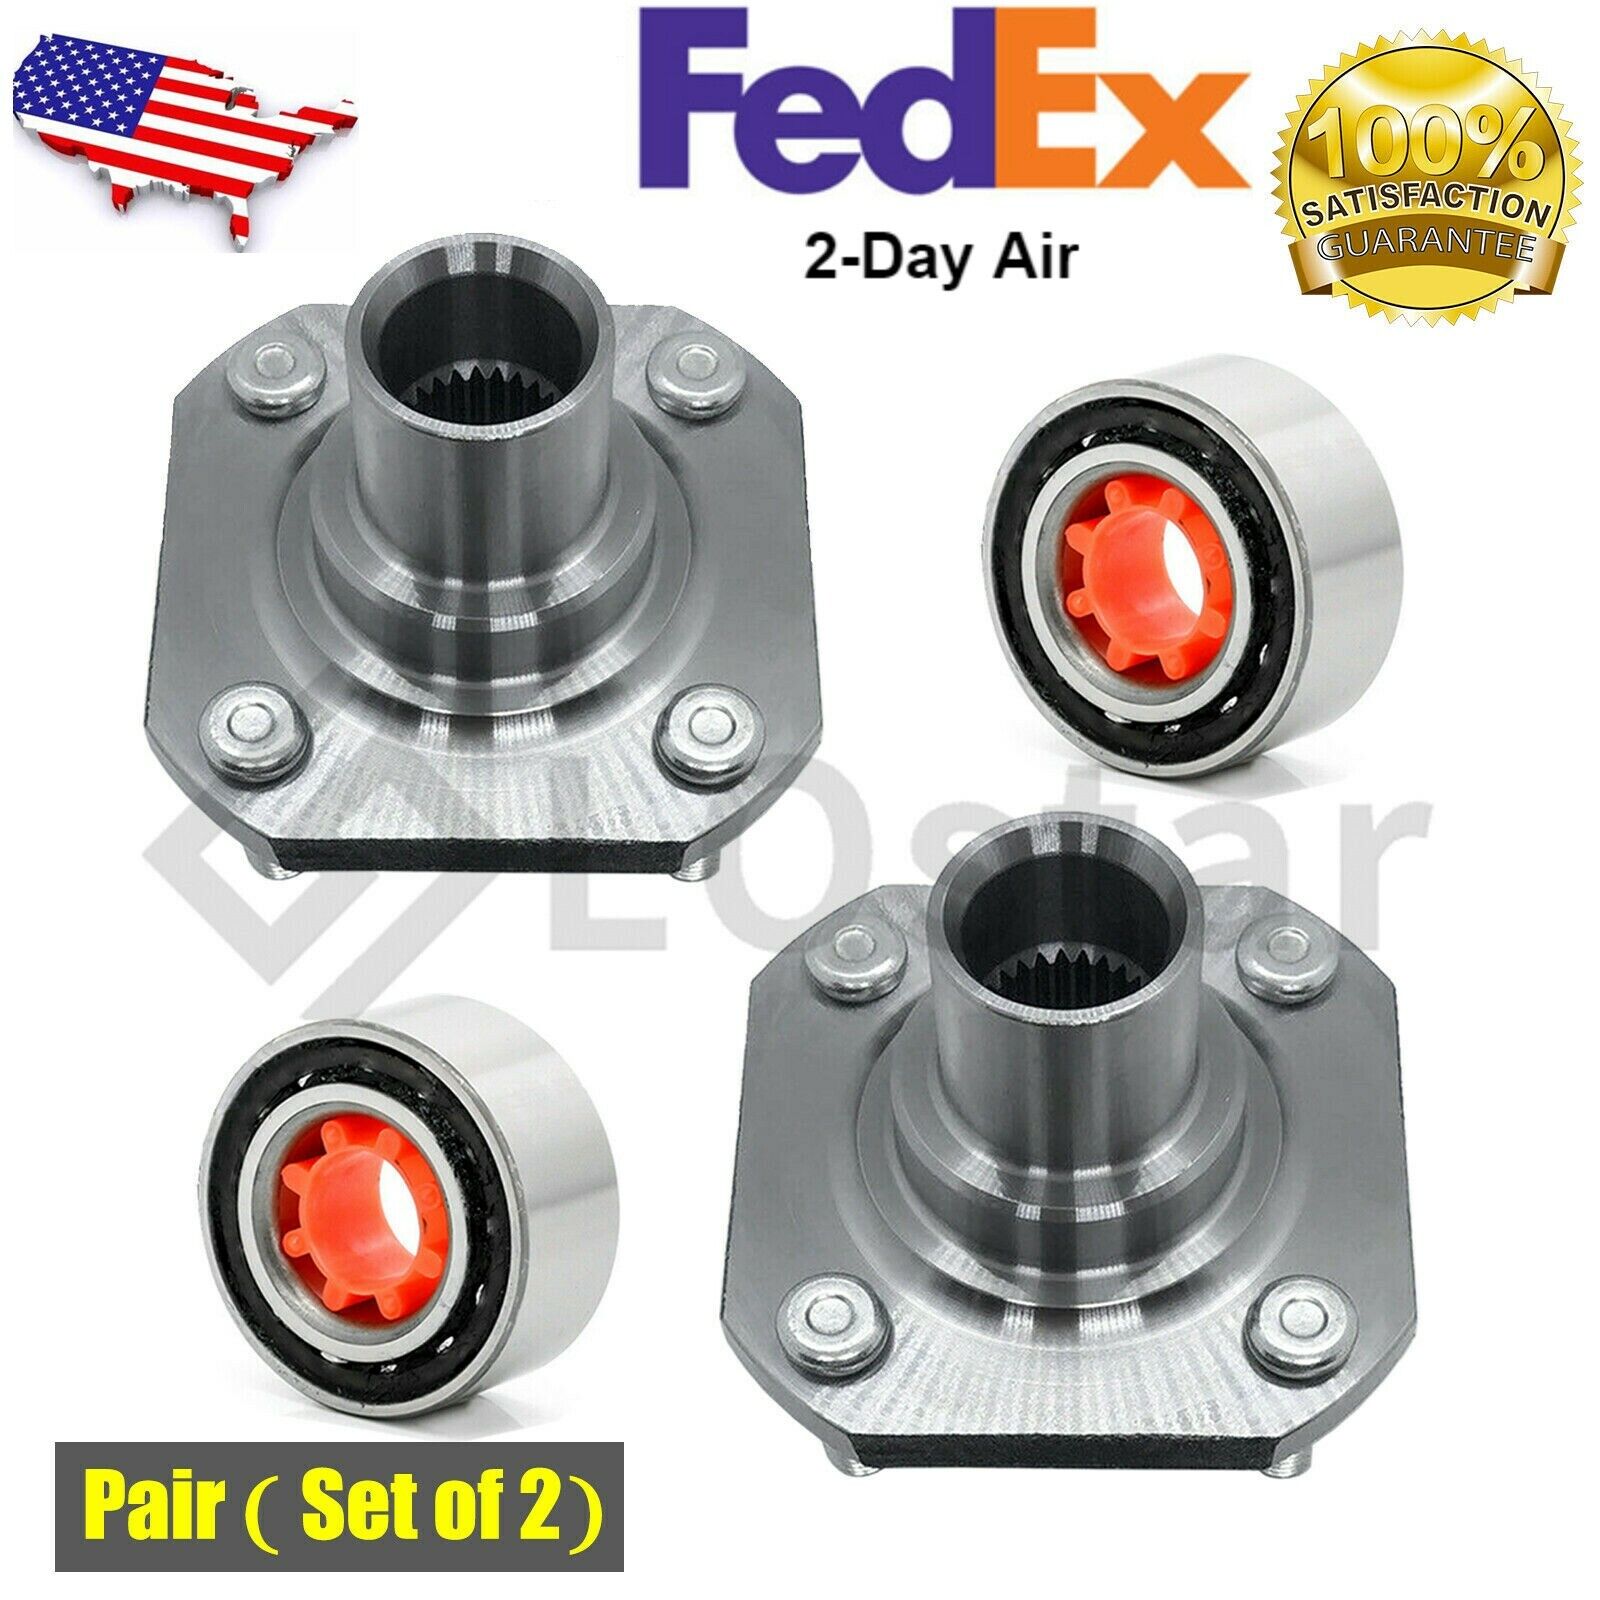 Pair(2) New Front Wheel Hub & Bearing Assembly Fits Toyota Tercel Paseo